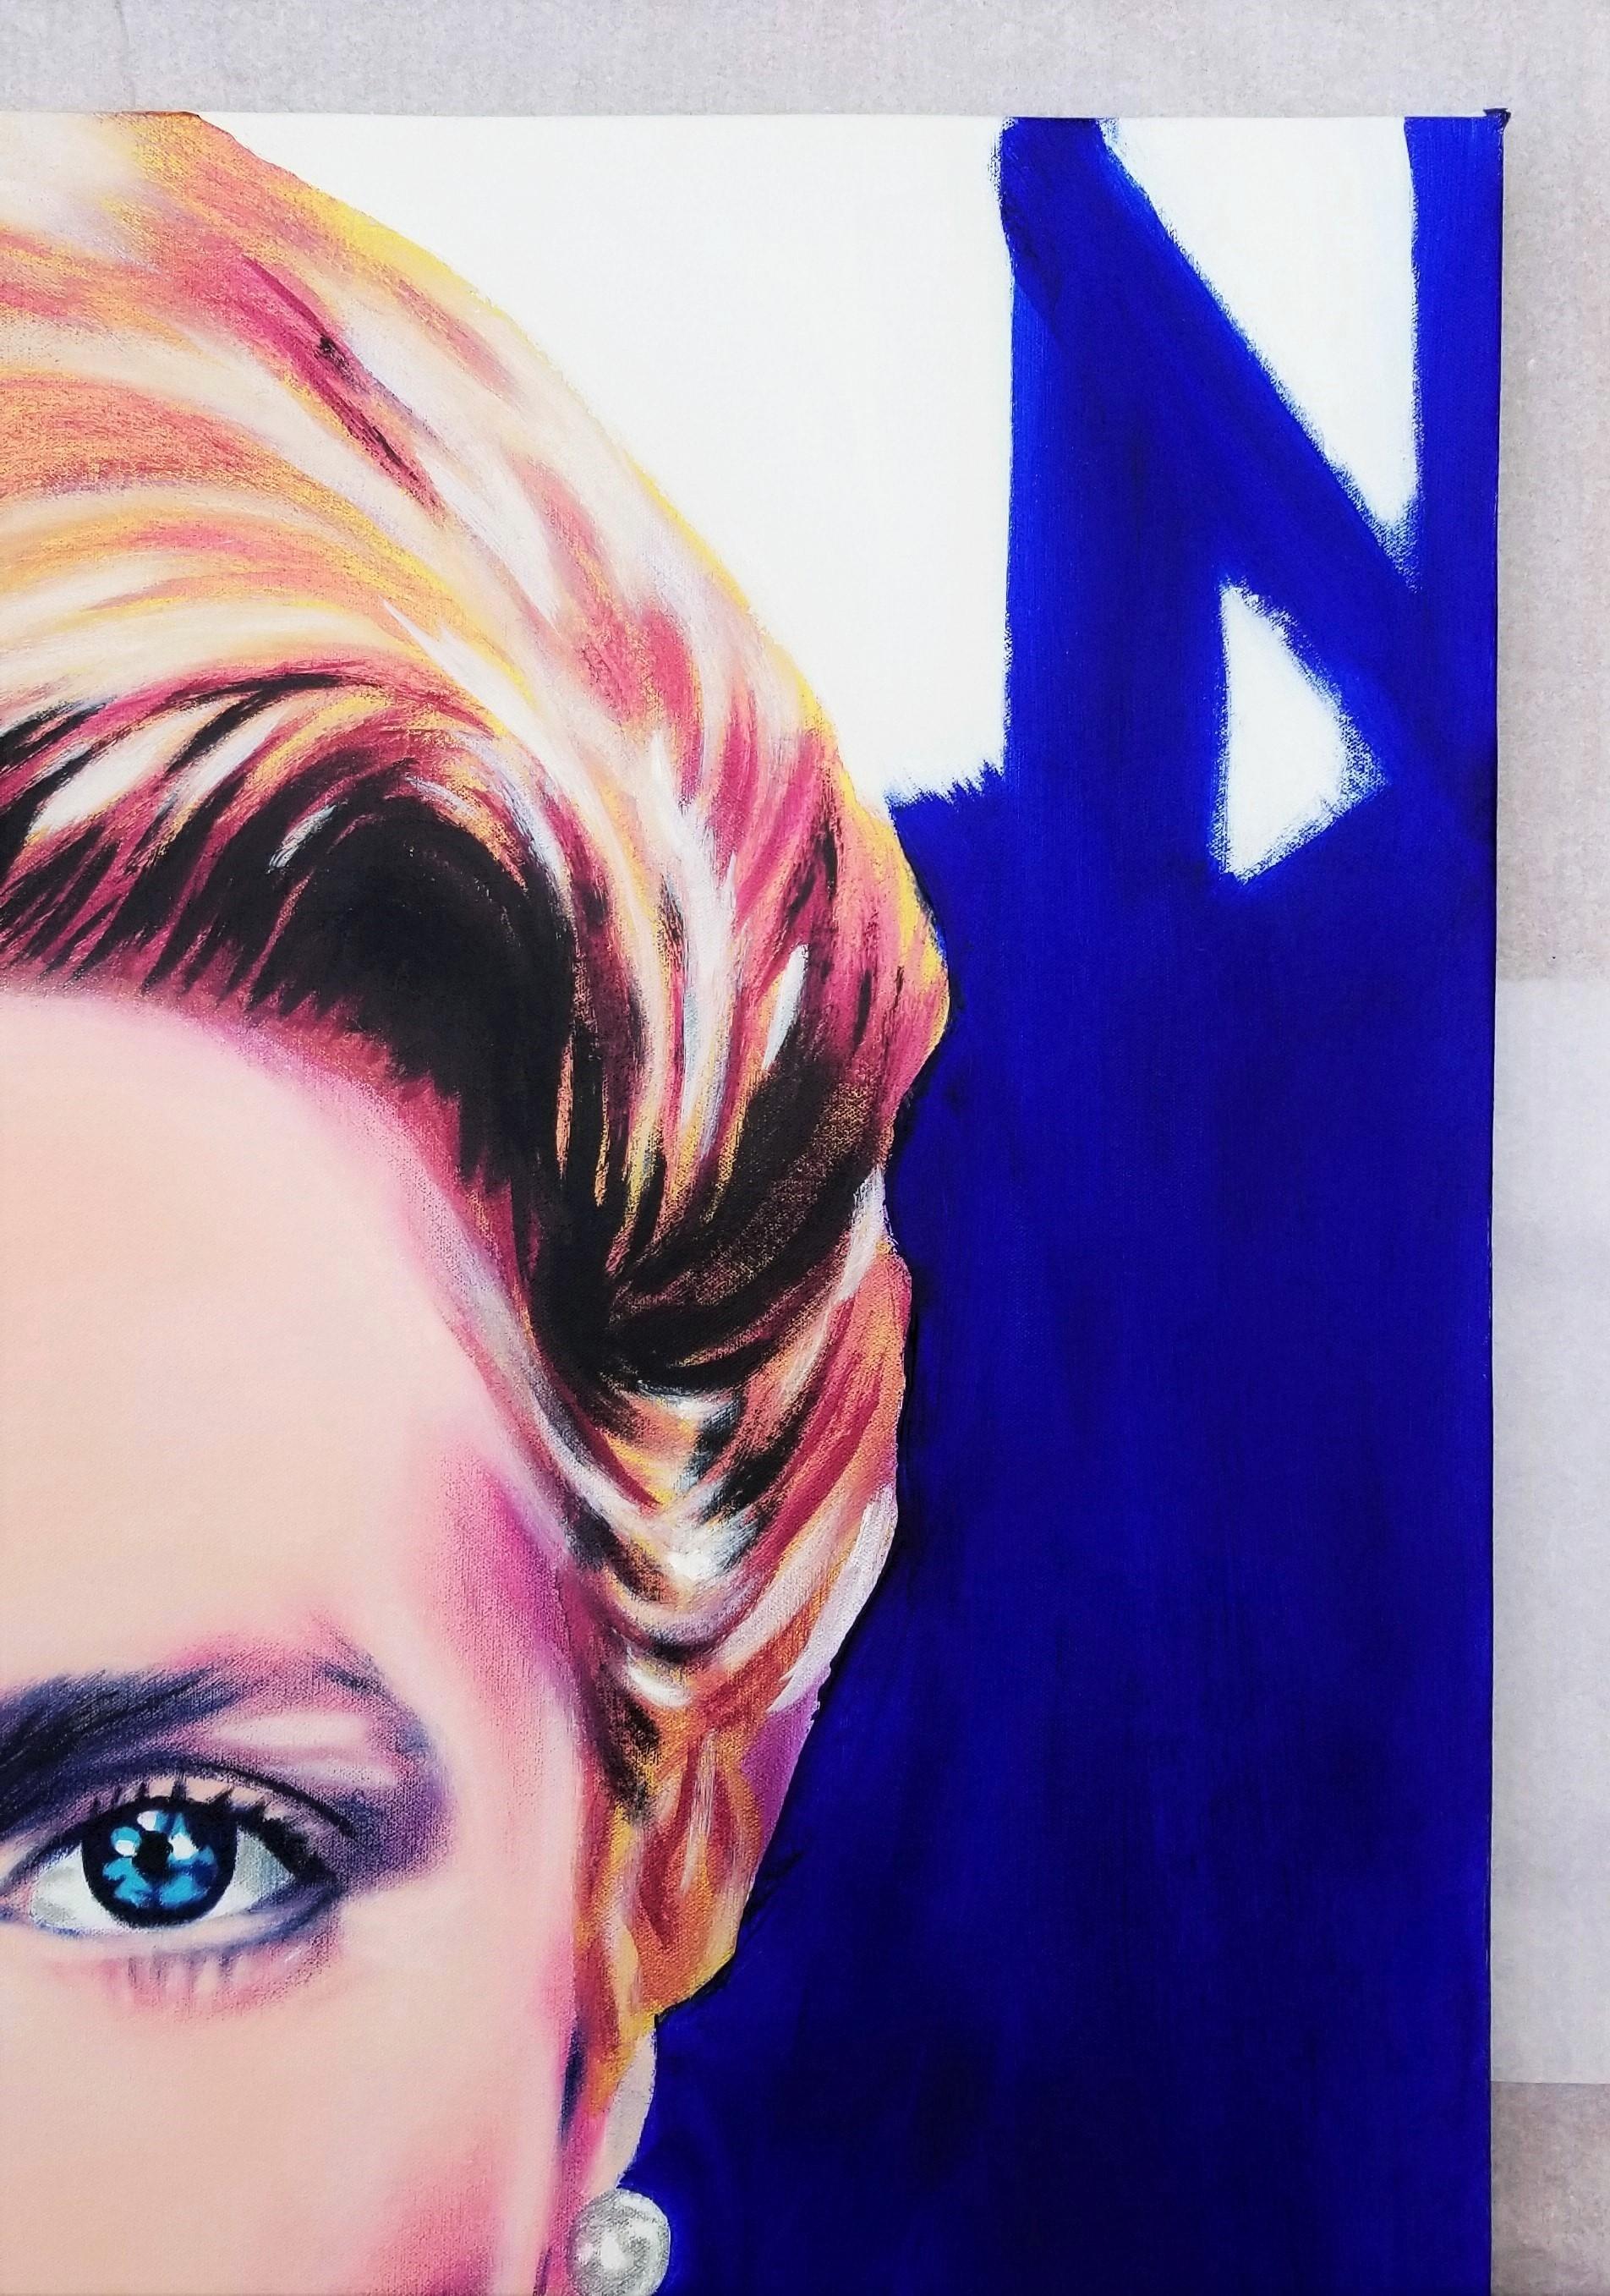 Grace Kelly Icon Platinum /// Contemporary Pop Painting Actress Fashion Model - Beige Portrait Painting by Jack Graves III